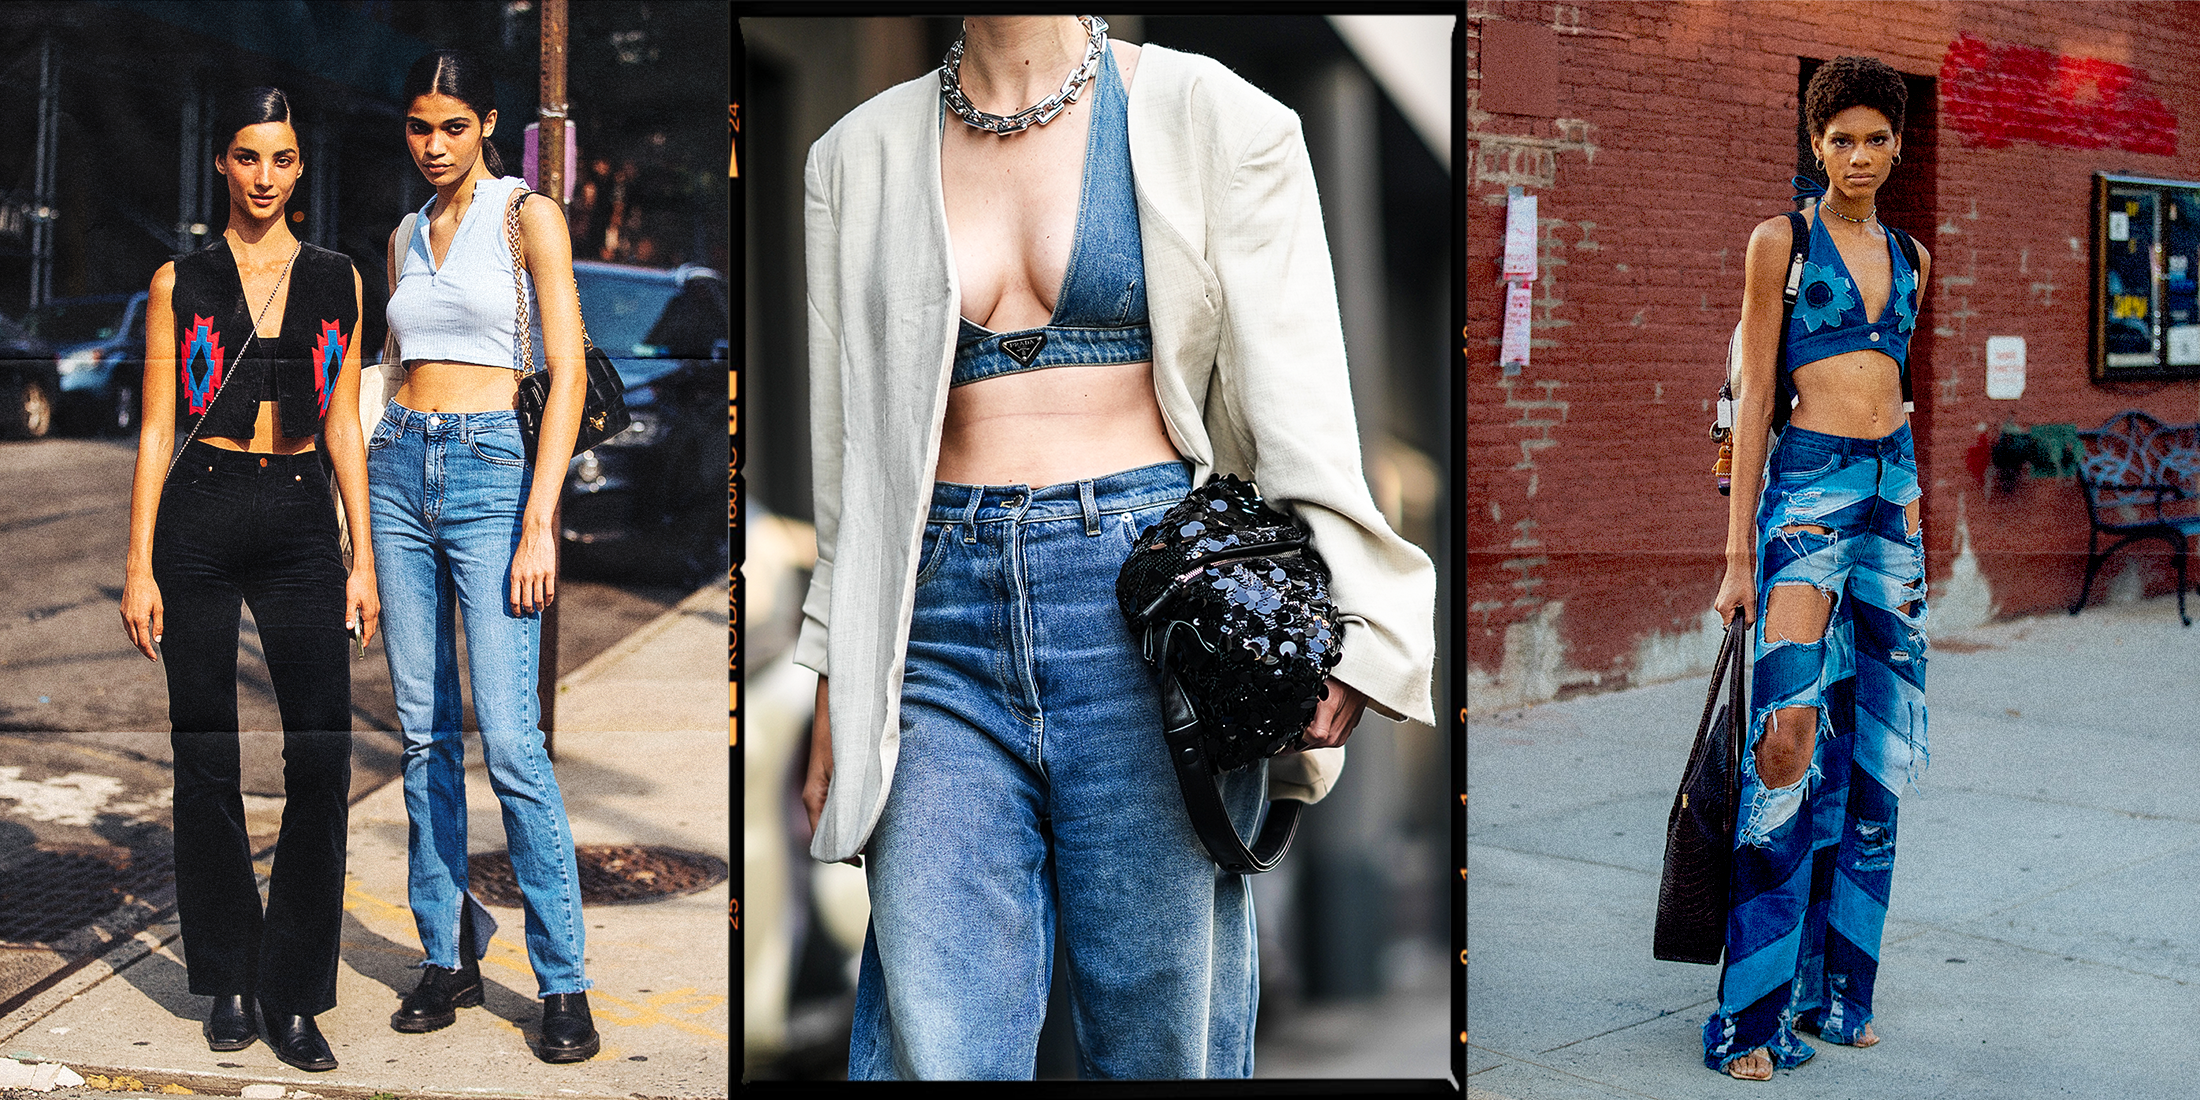 Best jeans for tall women, to solve height-related denim dilemmas